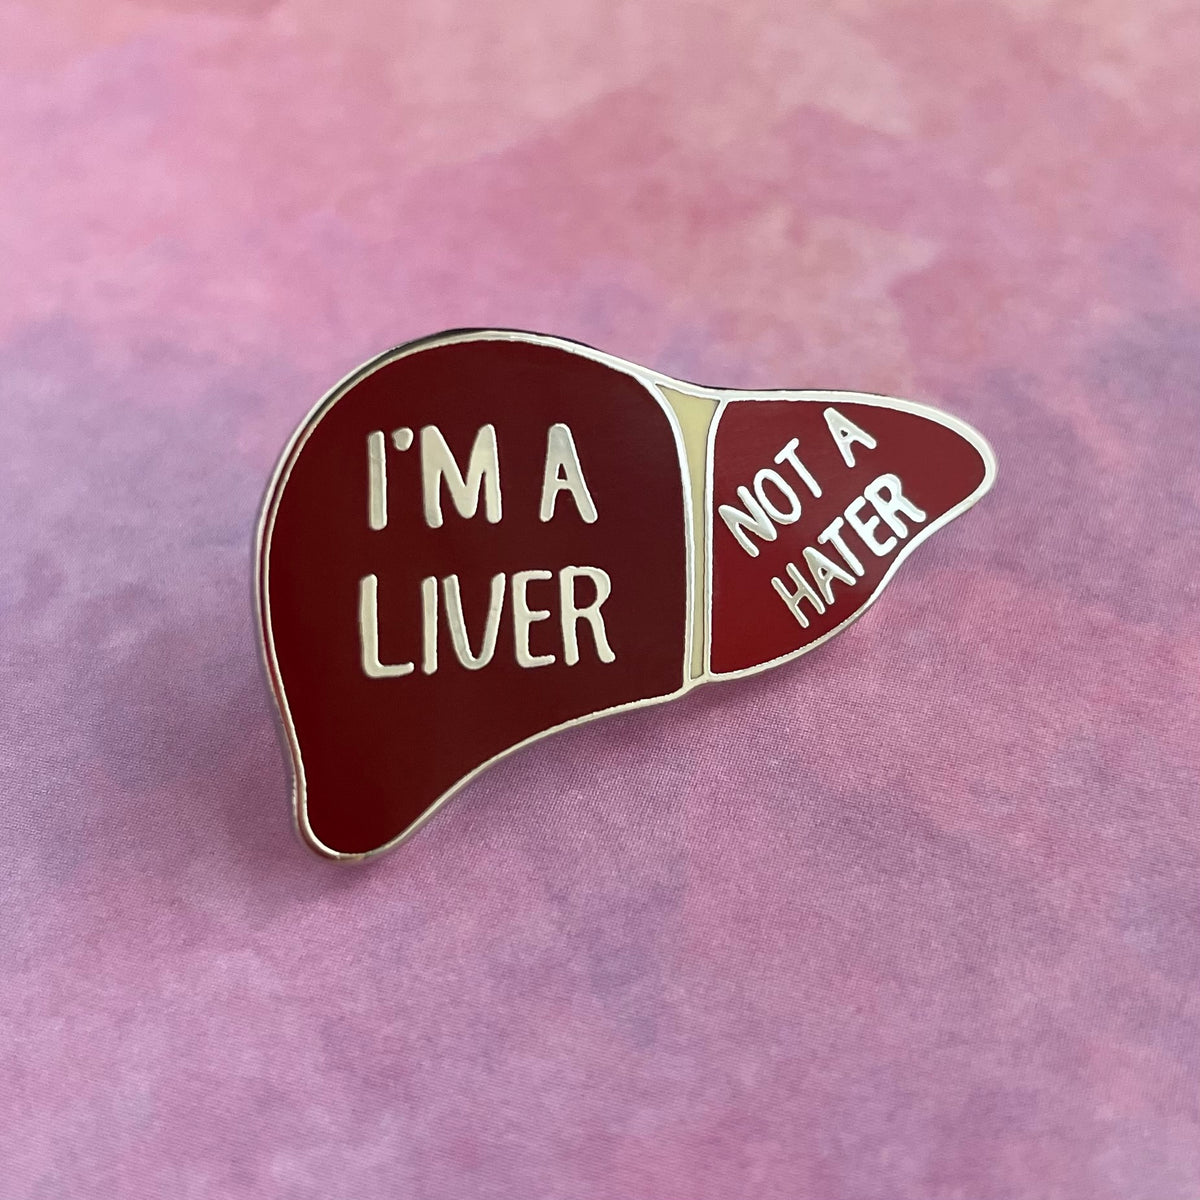 Liver, Not a Hater Pin - Rad Girl Creations